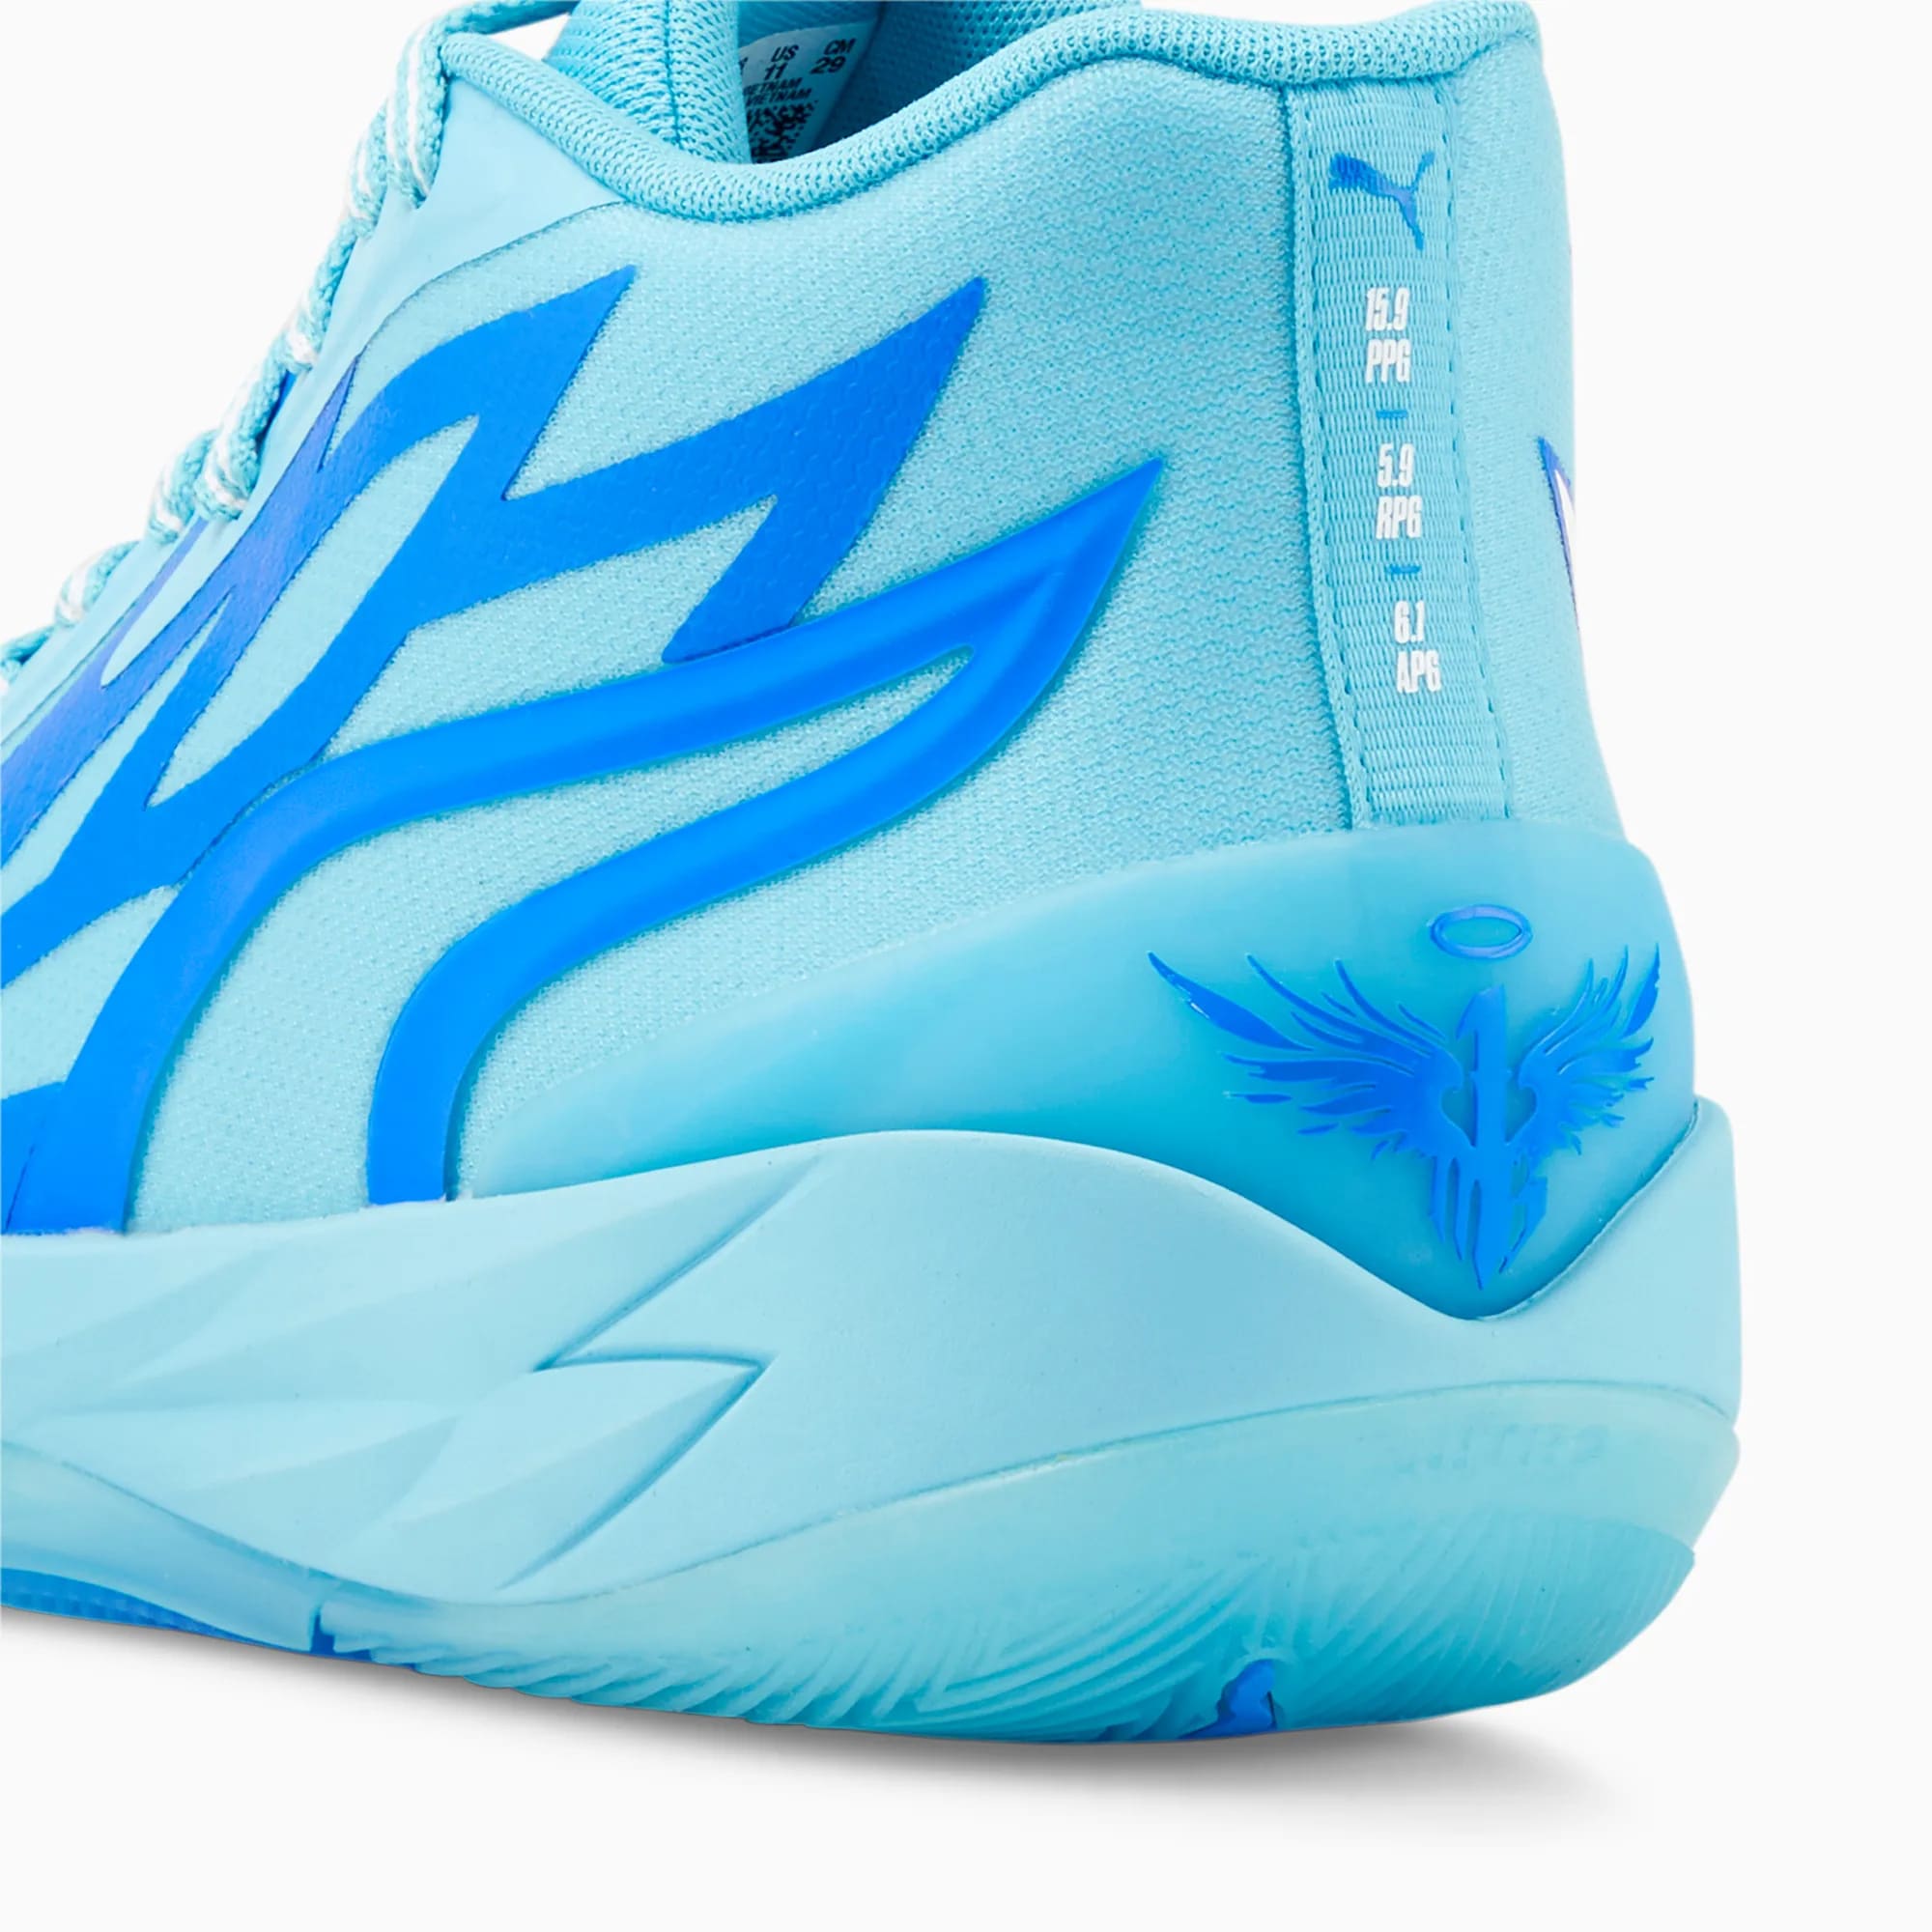 Puma MB.02 Rookie of the Year Release Date 377586_01 Heel Detail